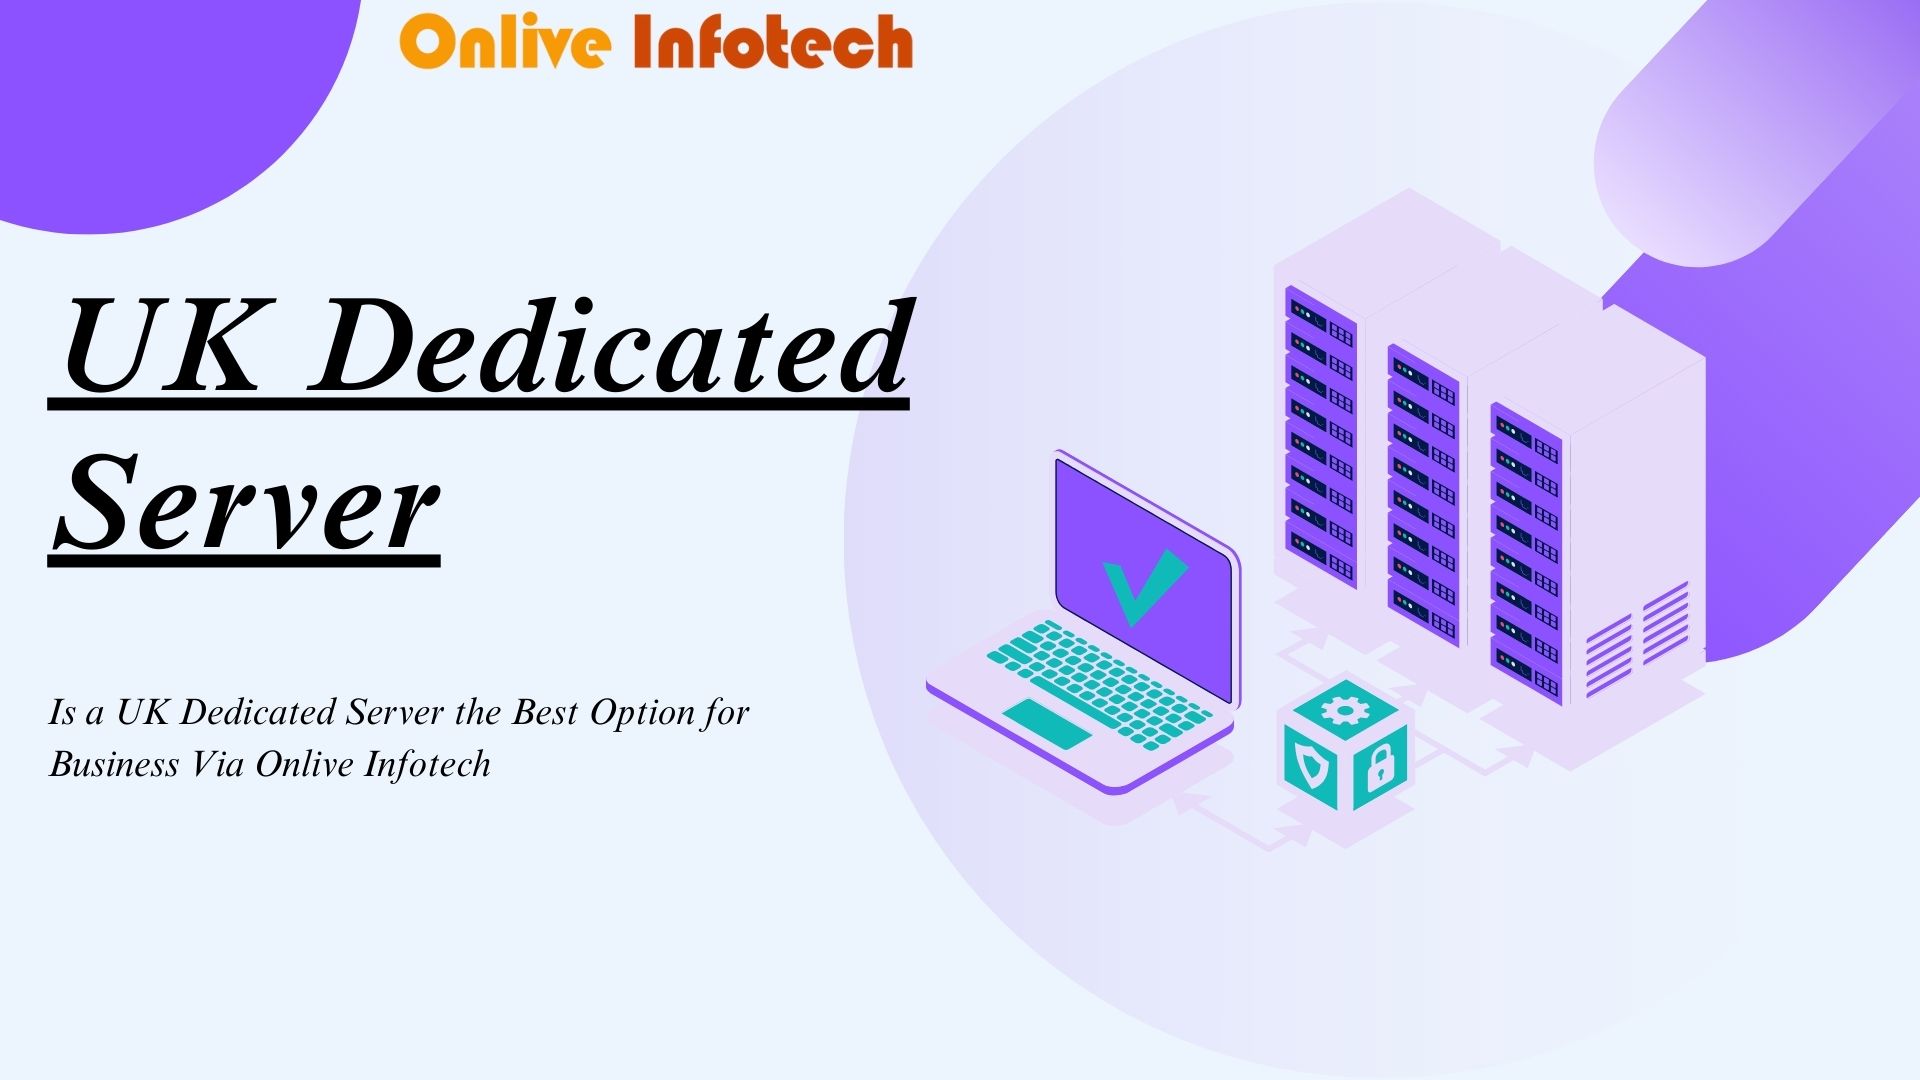 Utilize a dedicated server from Onlive Infotech to maximize your online presence.